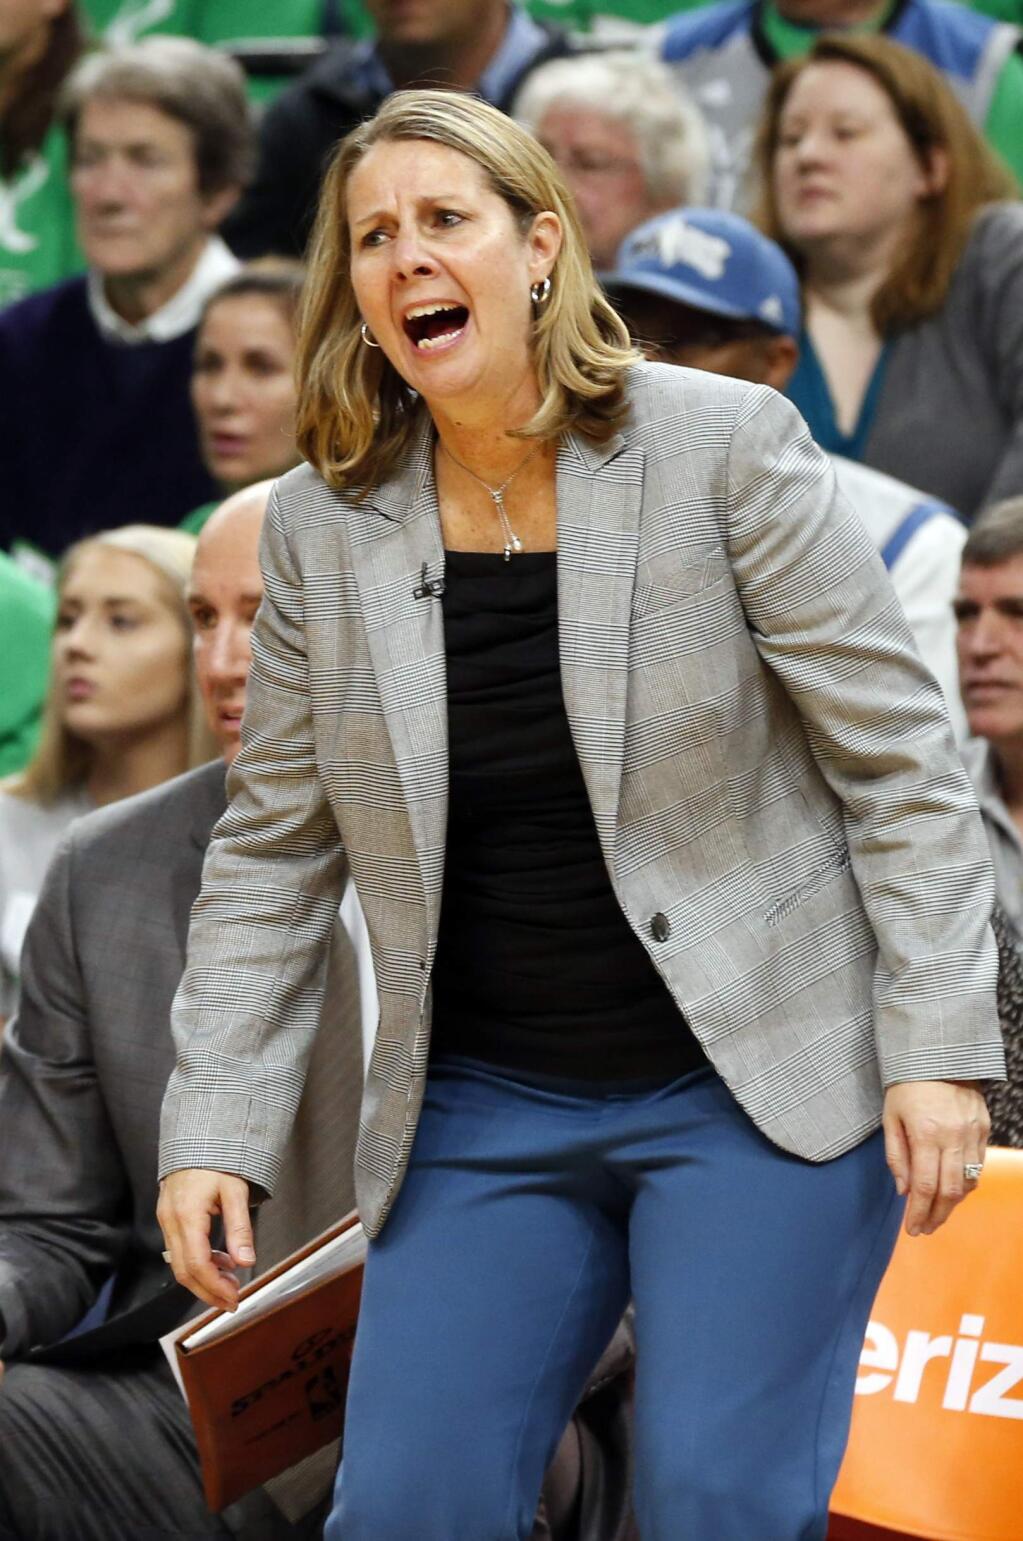 Minnesota Lynx head coach Cheryl Reeve directs her team in the second half during Game 5 of the WNBA basketball finals Thursday, Oct. 20, 2016, in Minneapolis. (AP Photo/Jim Mone)